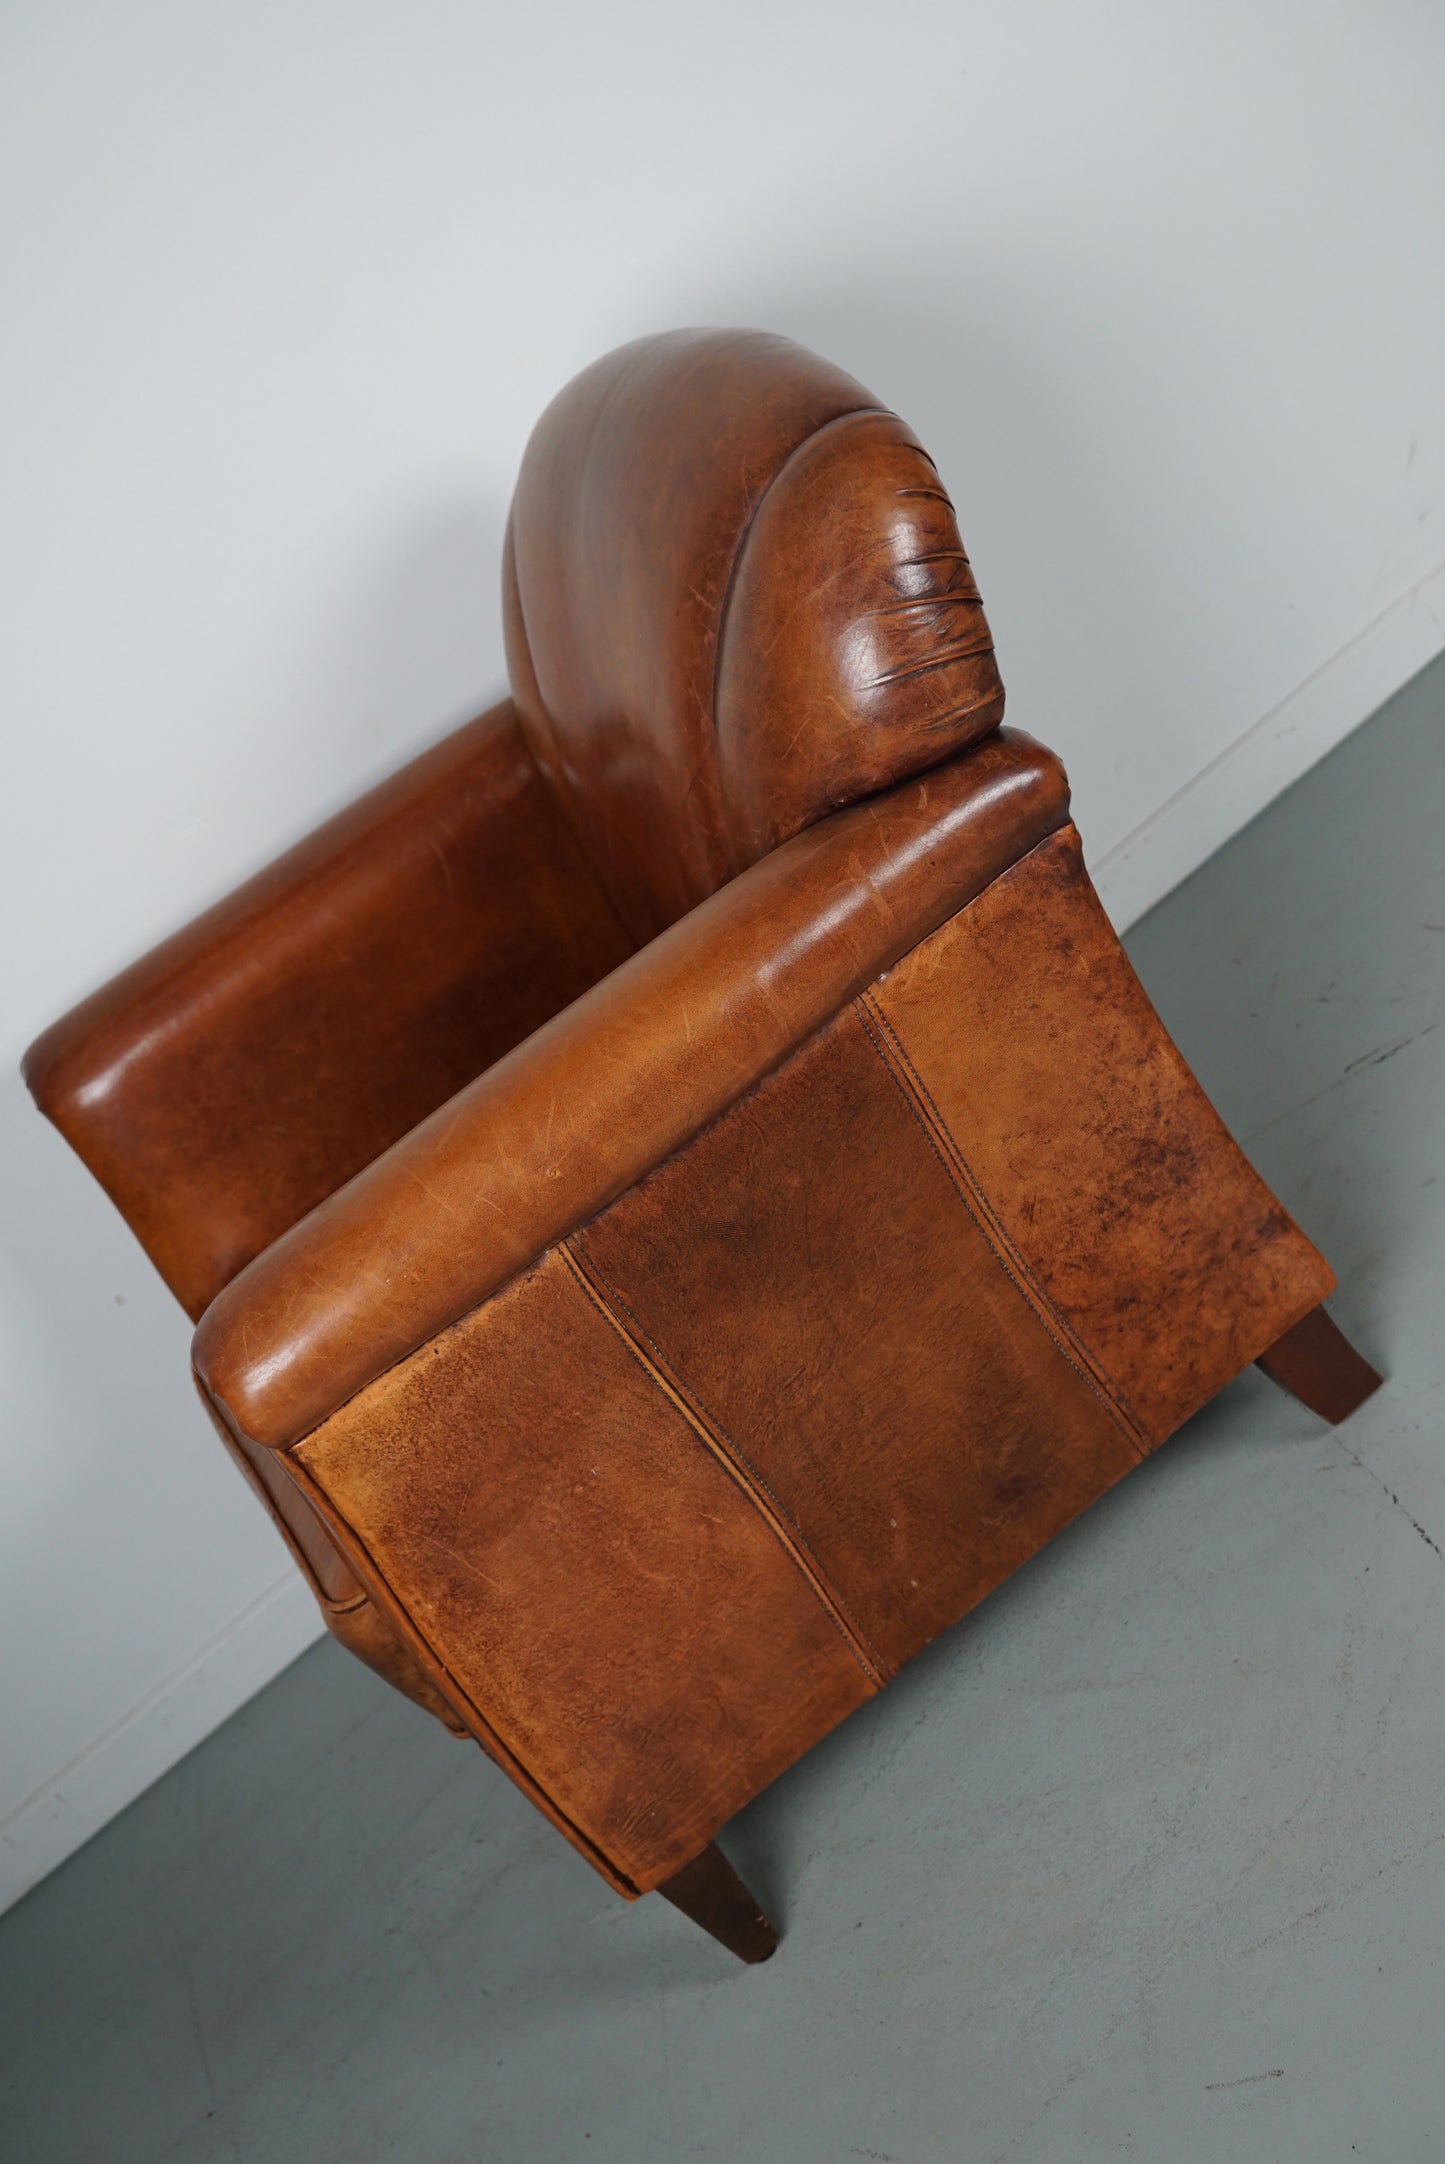 Vintage Dutch Cognac Colored Leather Club Chair, with Footstool